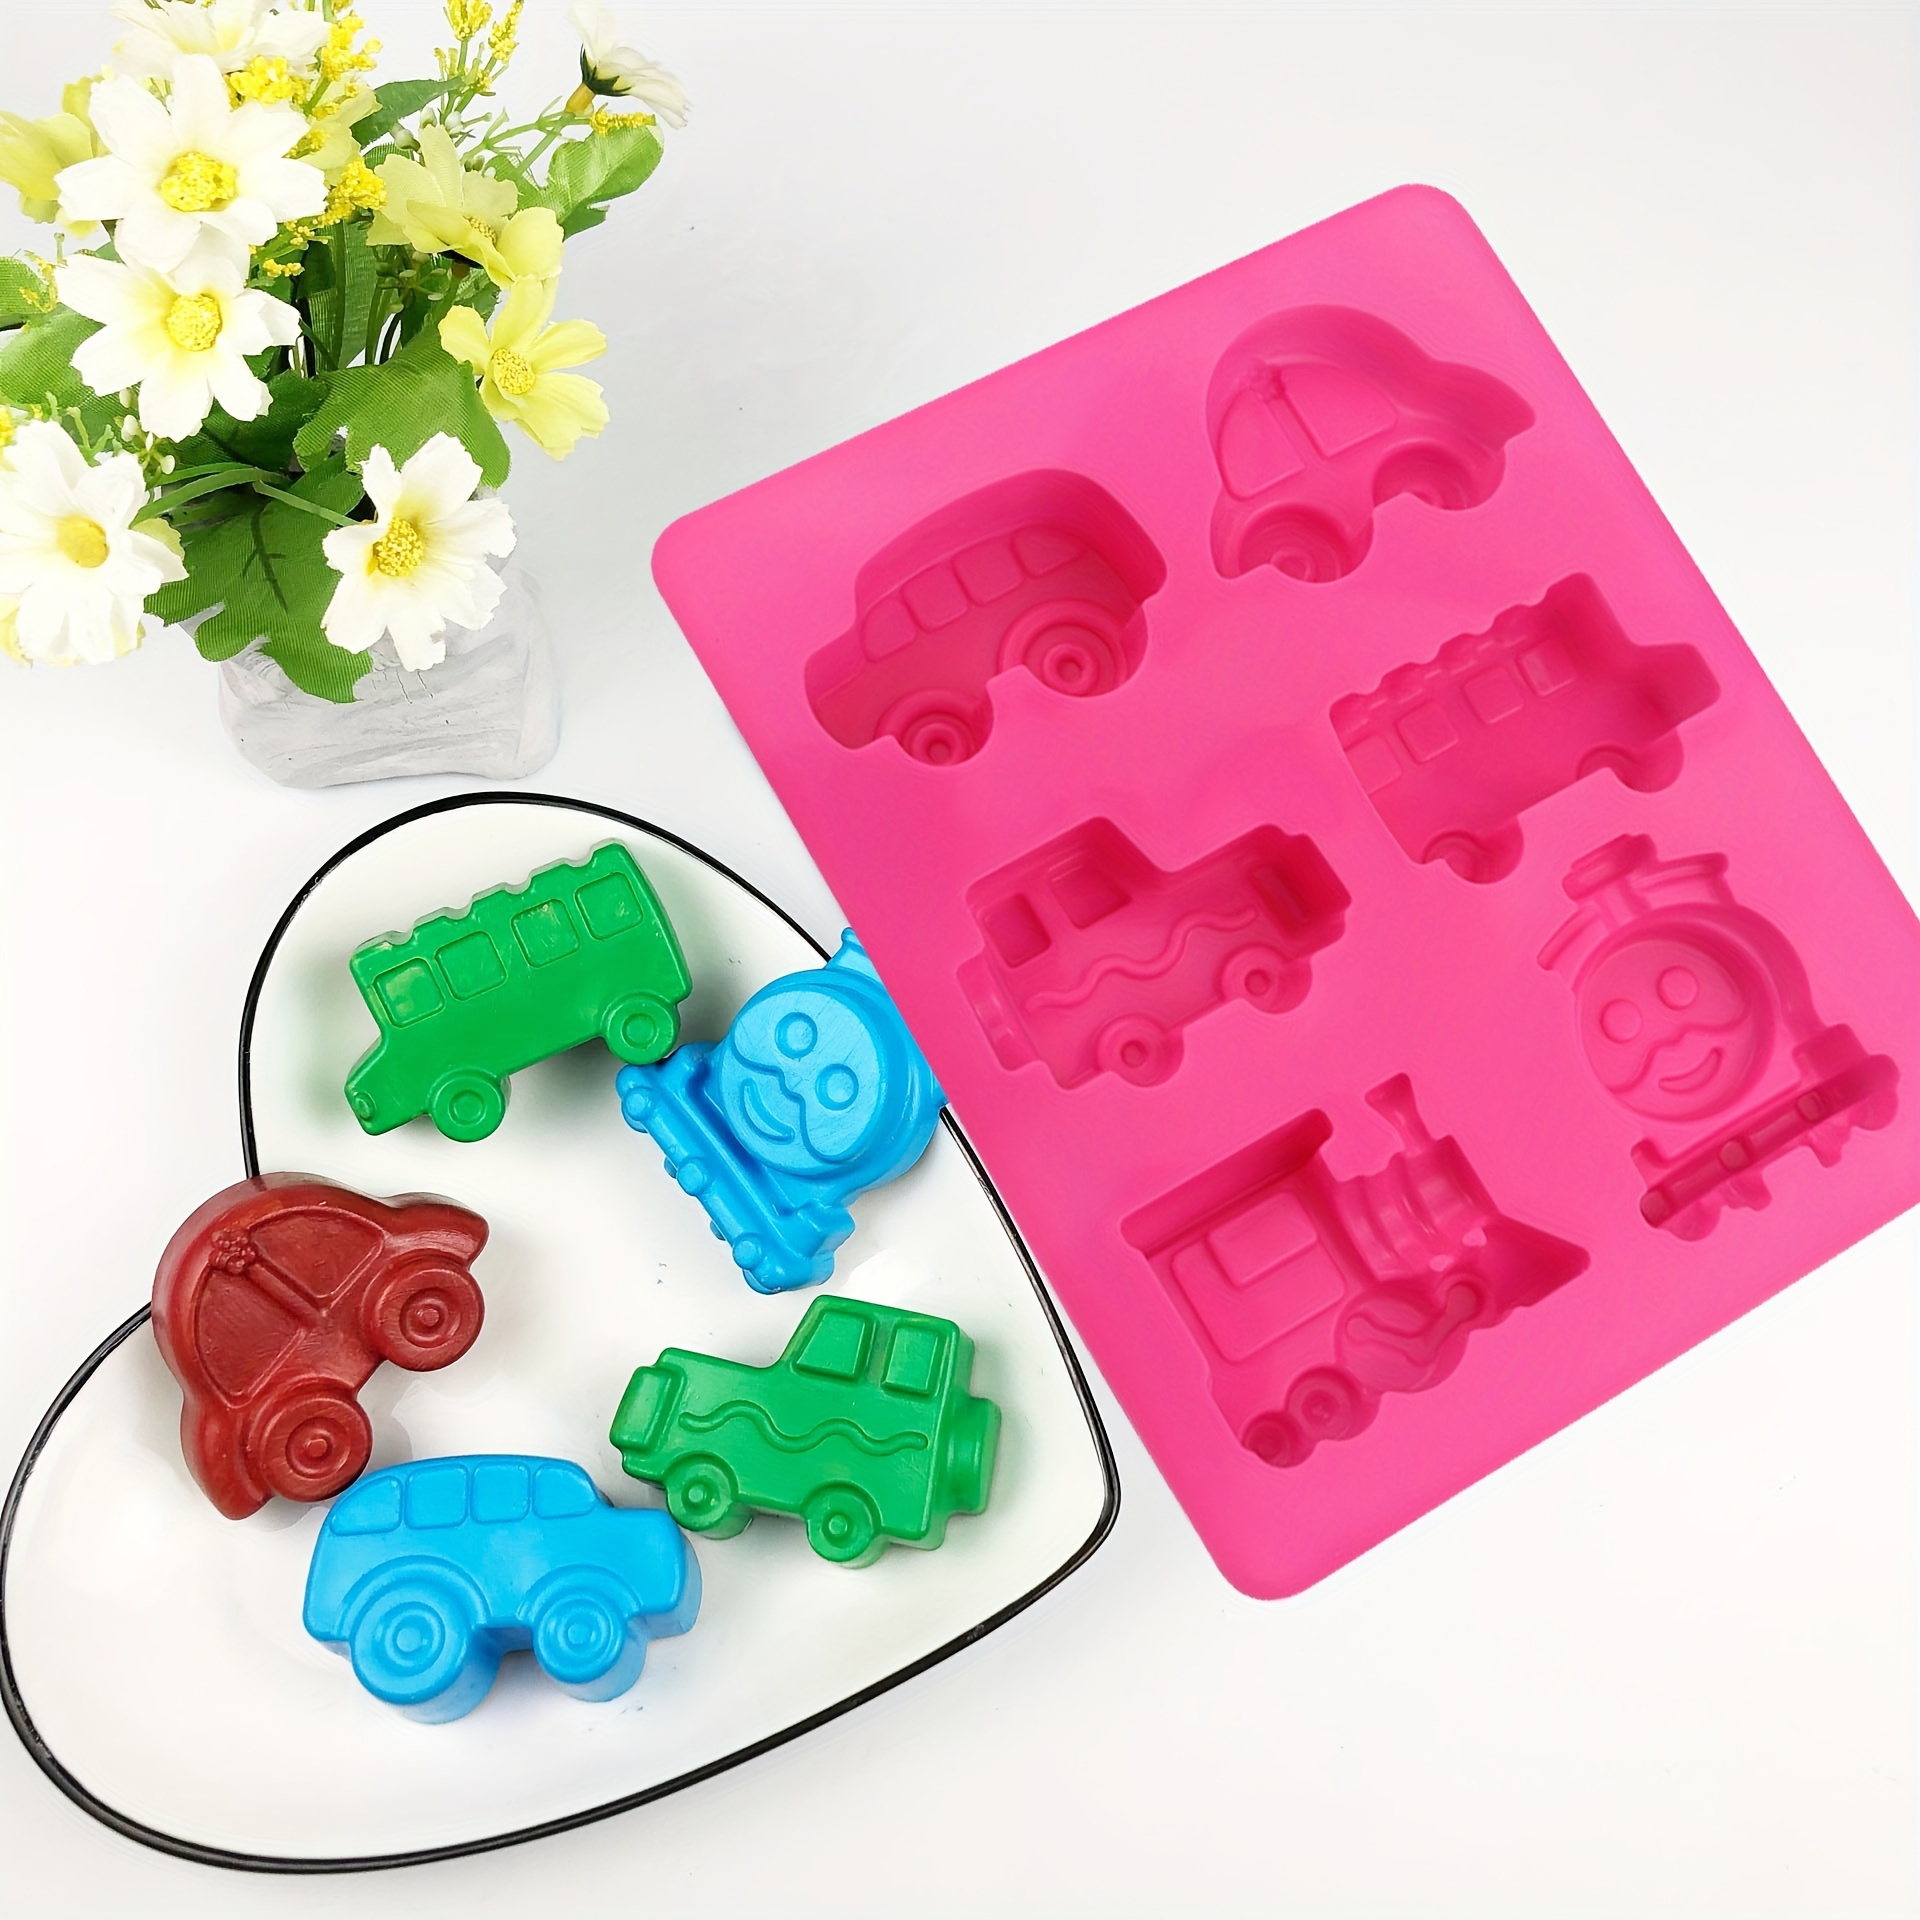 

1pc/3pcs, Car Train Vehicle Shaped Cake Mold, 3d Silicone Mold, Candy Mold, Chocolate Molds Set, For Diy Cake Decorating Tool, Baking Tools, Kitchen Accessories